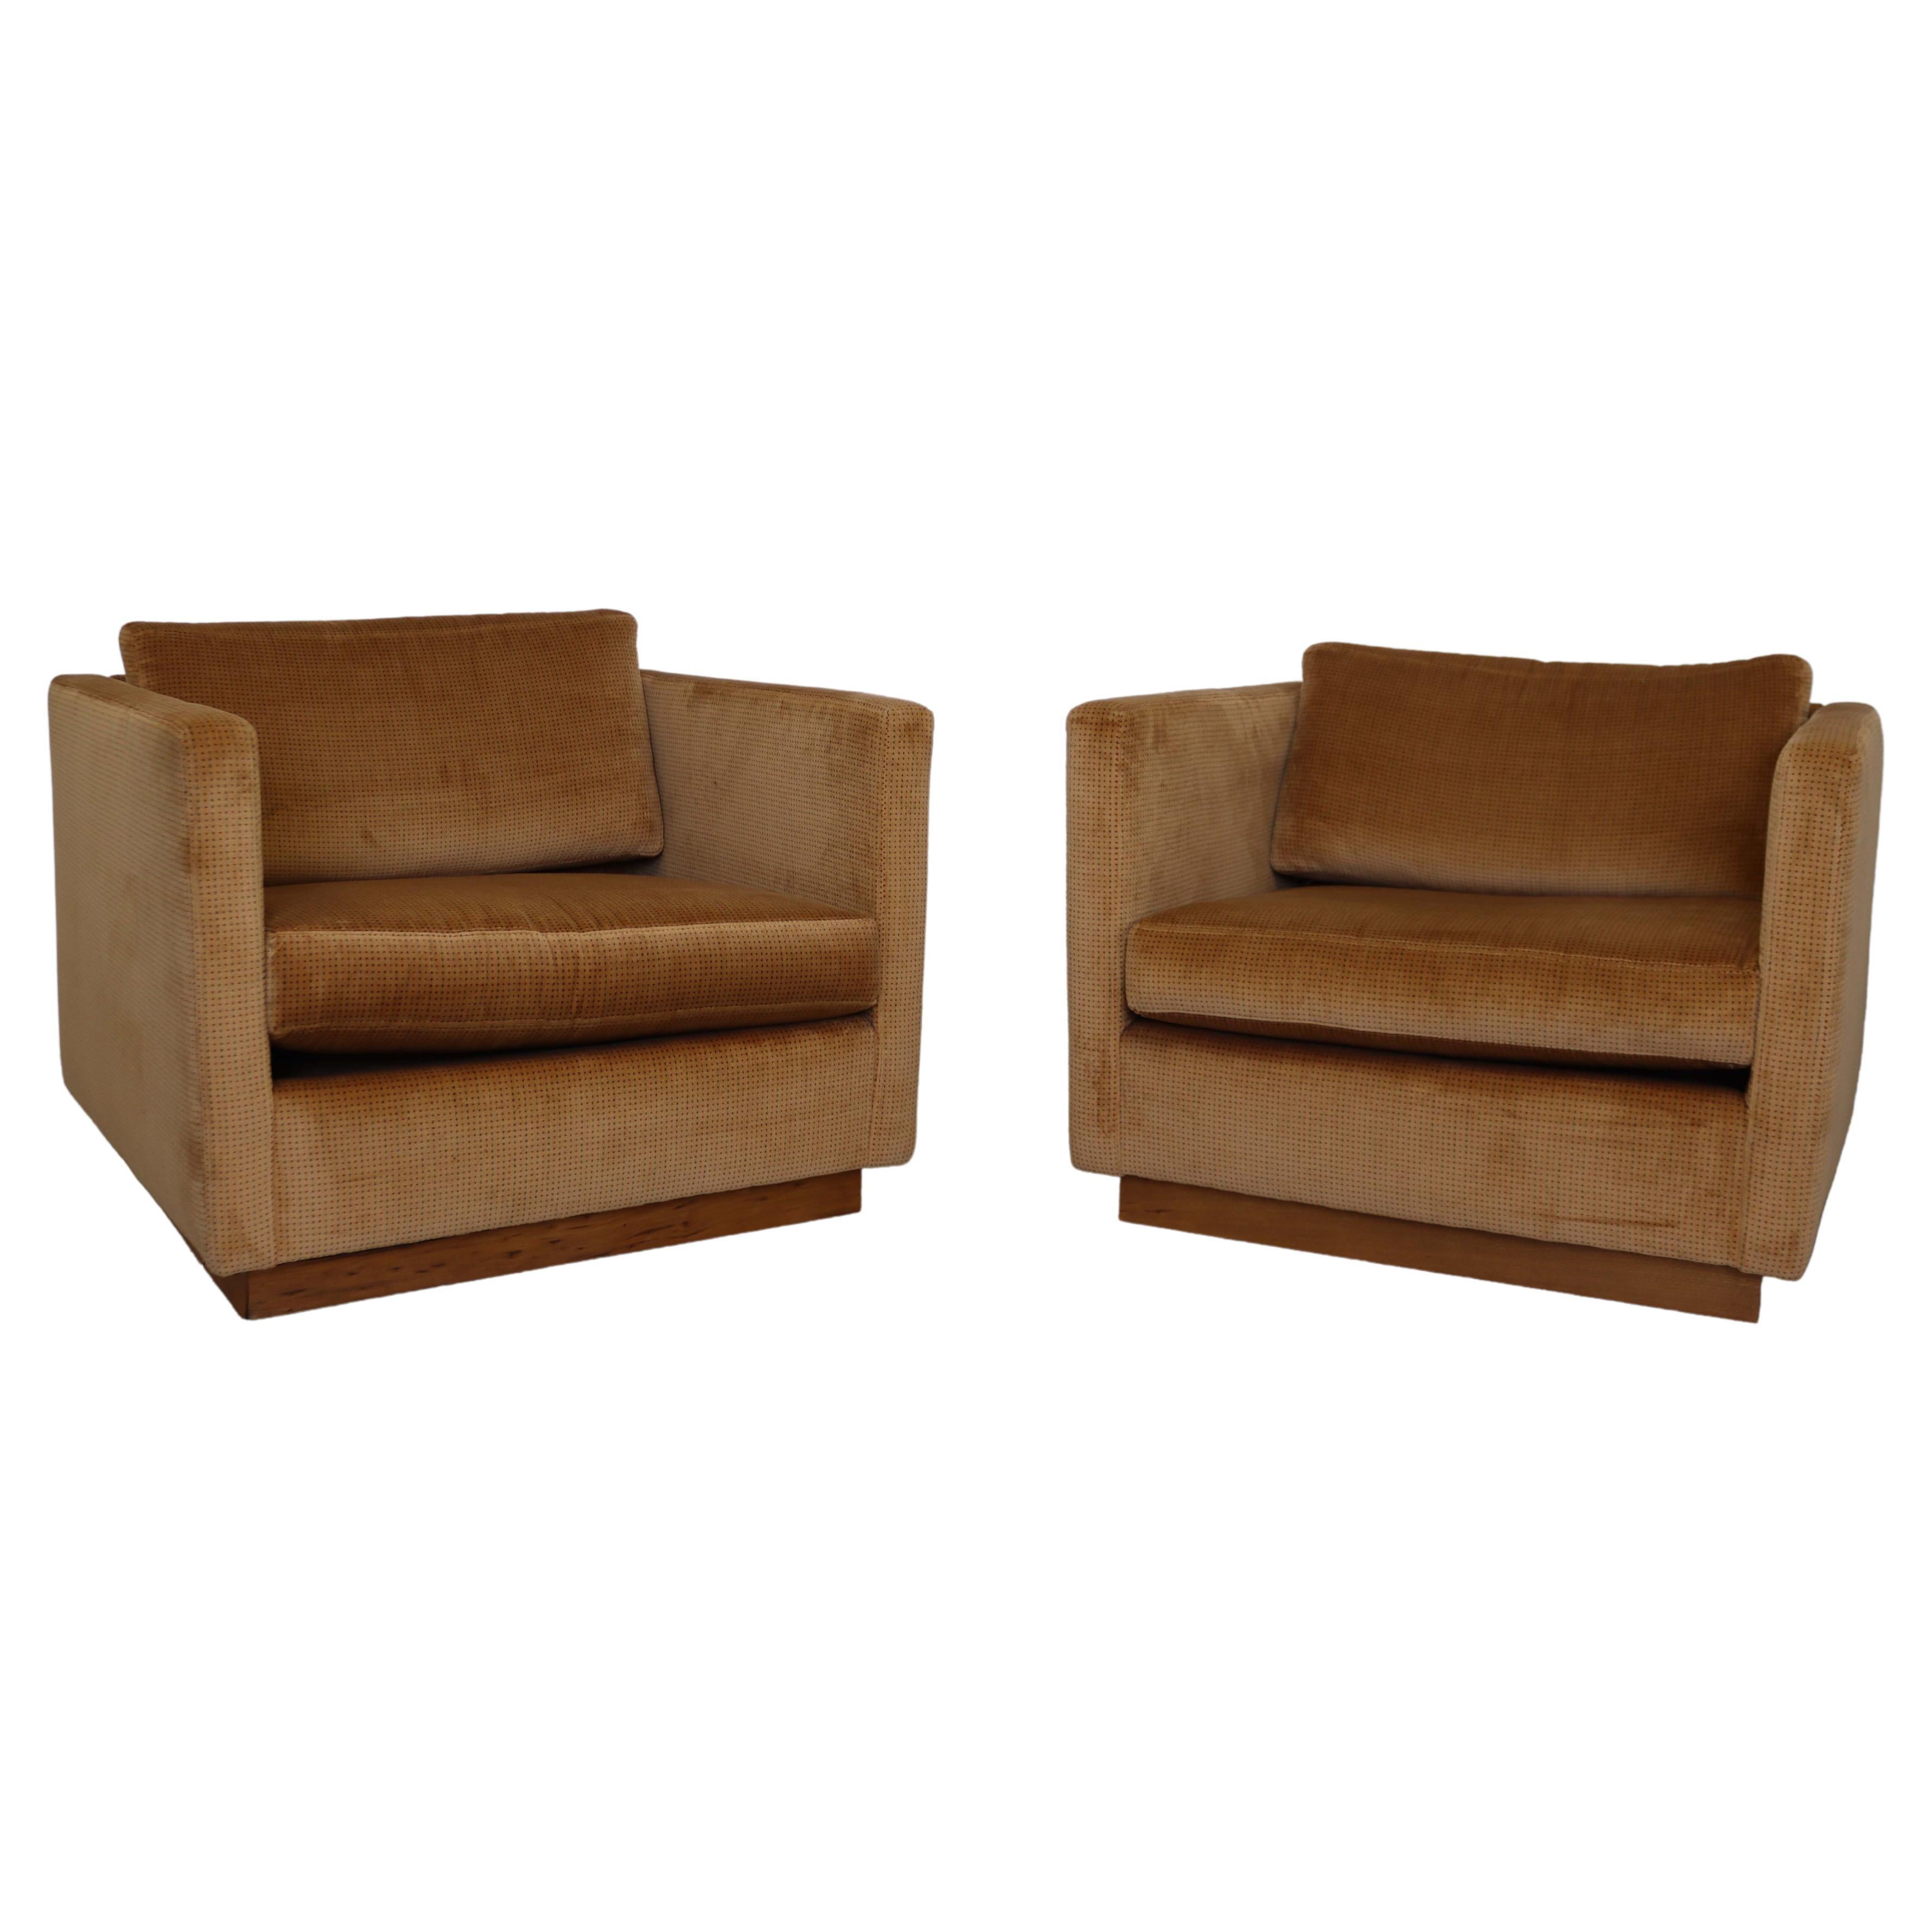 Pair of Baughman for Thayer Coggin Cube Lounge Chairs Mid-Century Modern